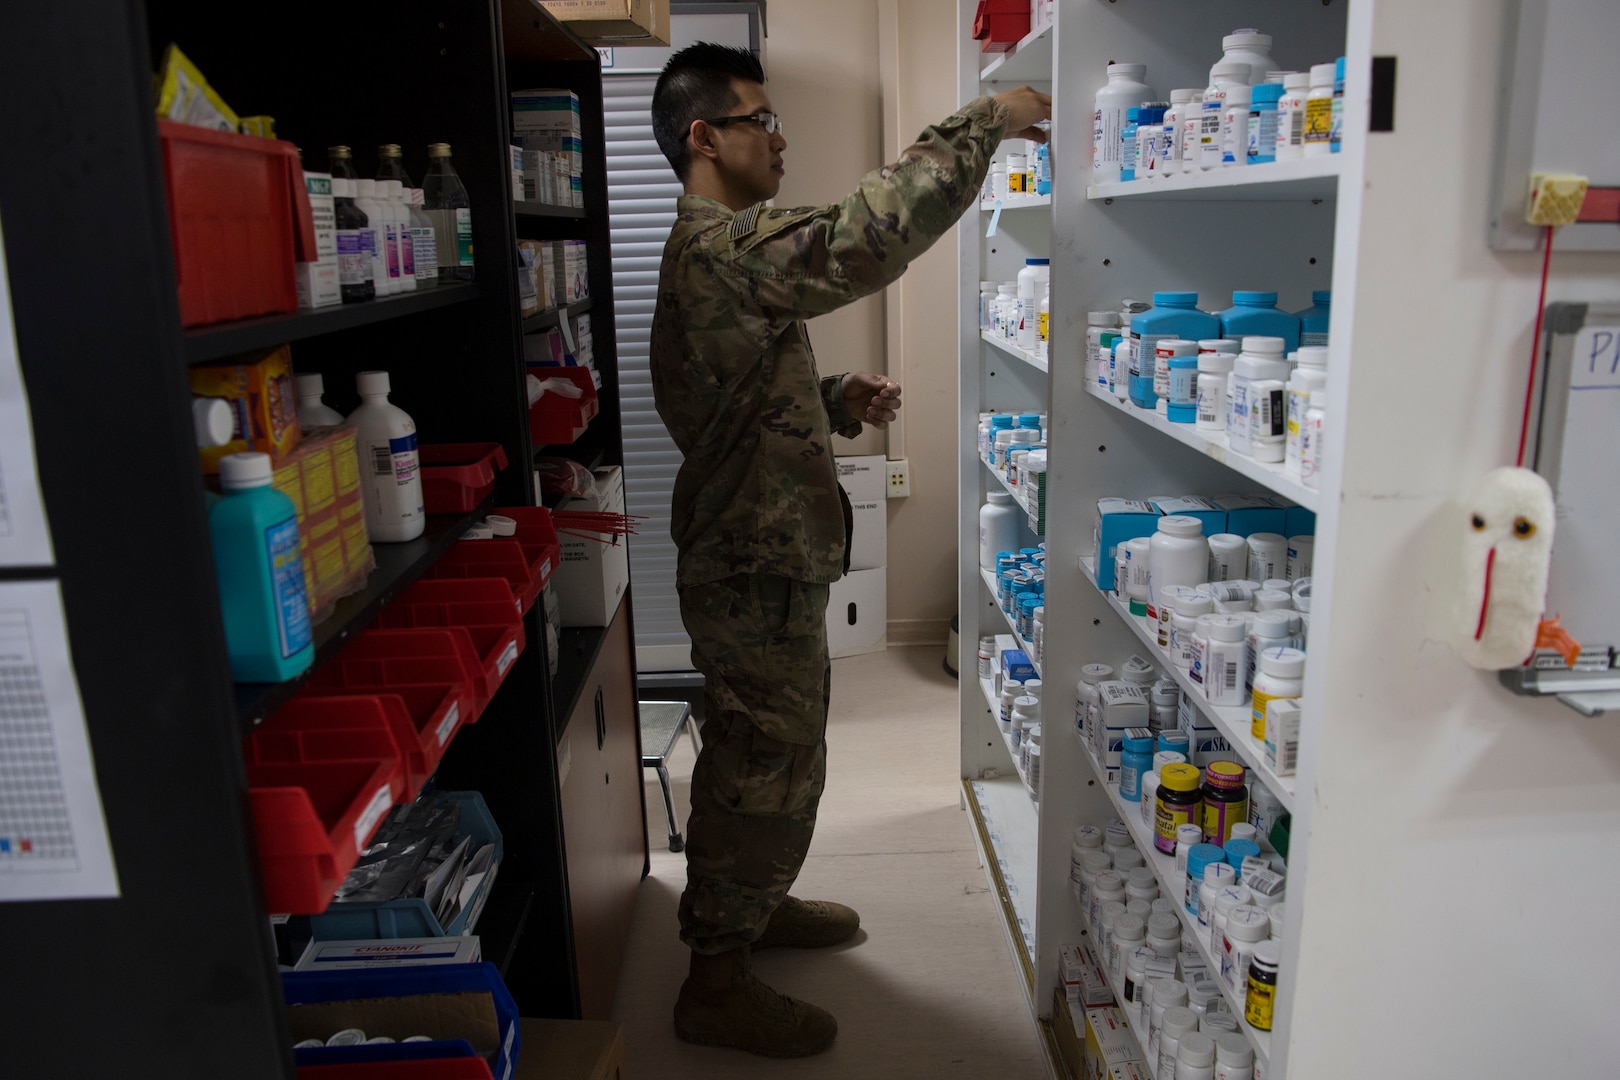 Tech. Sgt. Julian Ray Tayag, 386th Expeditionary Medical Group pharmacy technician from Joint Base San Antonio-Lackland, does inventory of the medication in the pharmacy at an undisclosed location in Southwest Asia May 7, 2018.